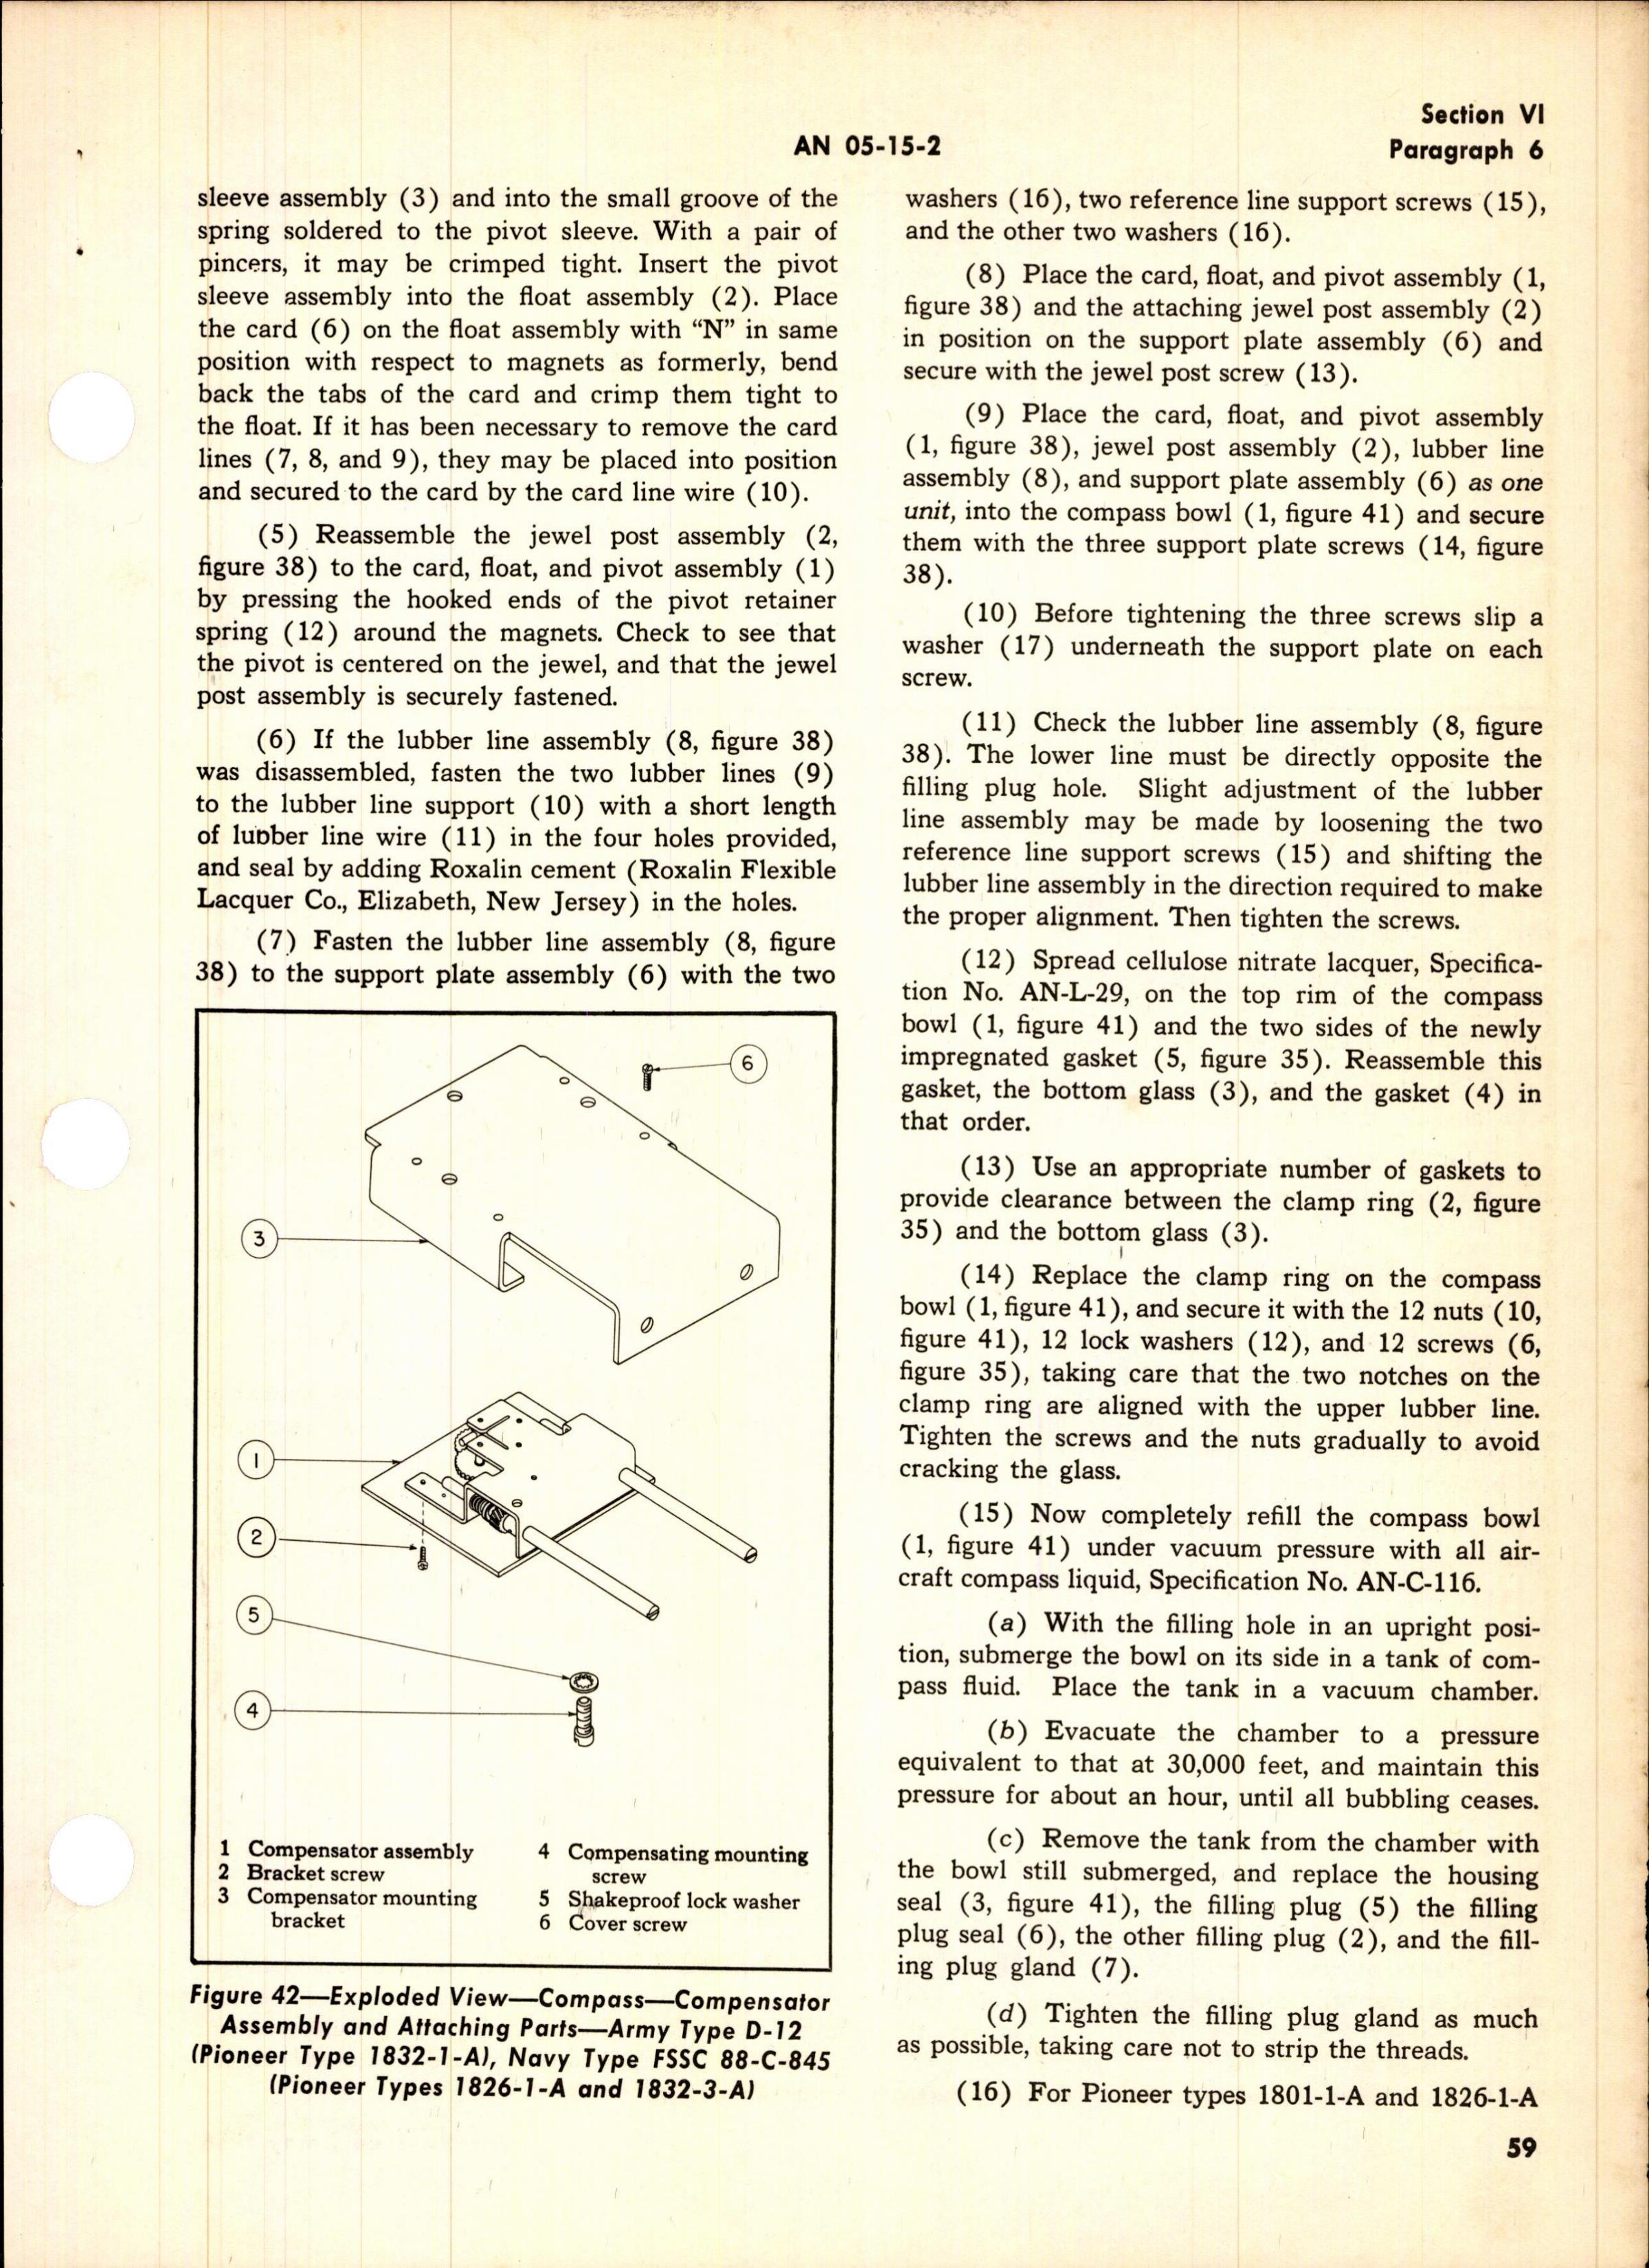 Sample page 3 from AirCorps Library document: Operation, Service, & Overhaul Instructions with Parts Catalog for Eclipse-Pioneer Magnetic Compasses